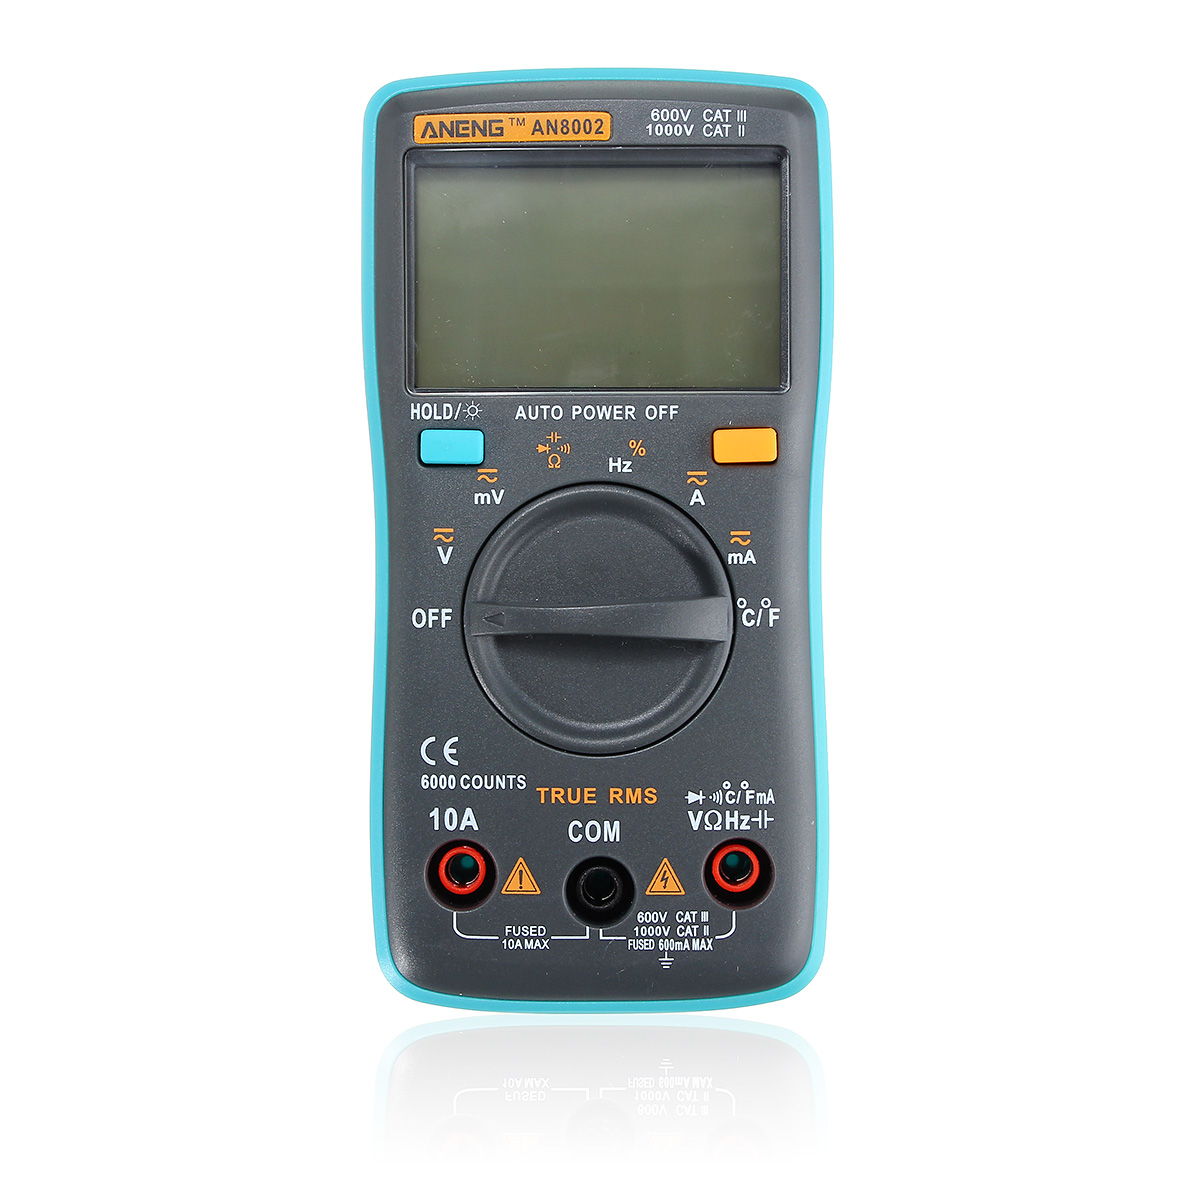 ANENG AN8002 Digital True RMS 6000 Counts Multimeter AC/DC Current Voltage Frequency Resistance Temperature Tester ℃/℉ 124